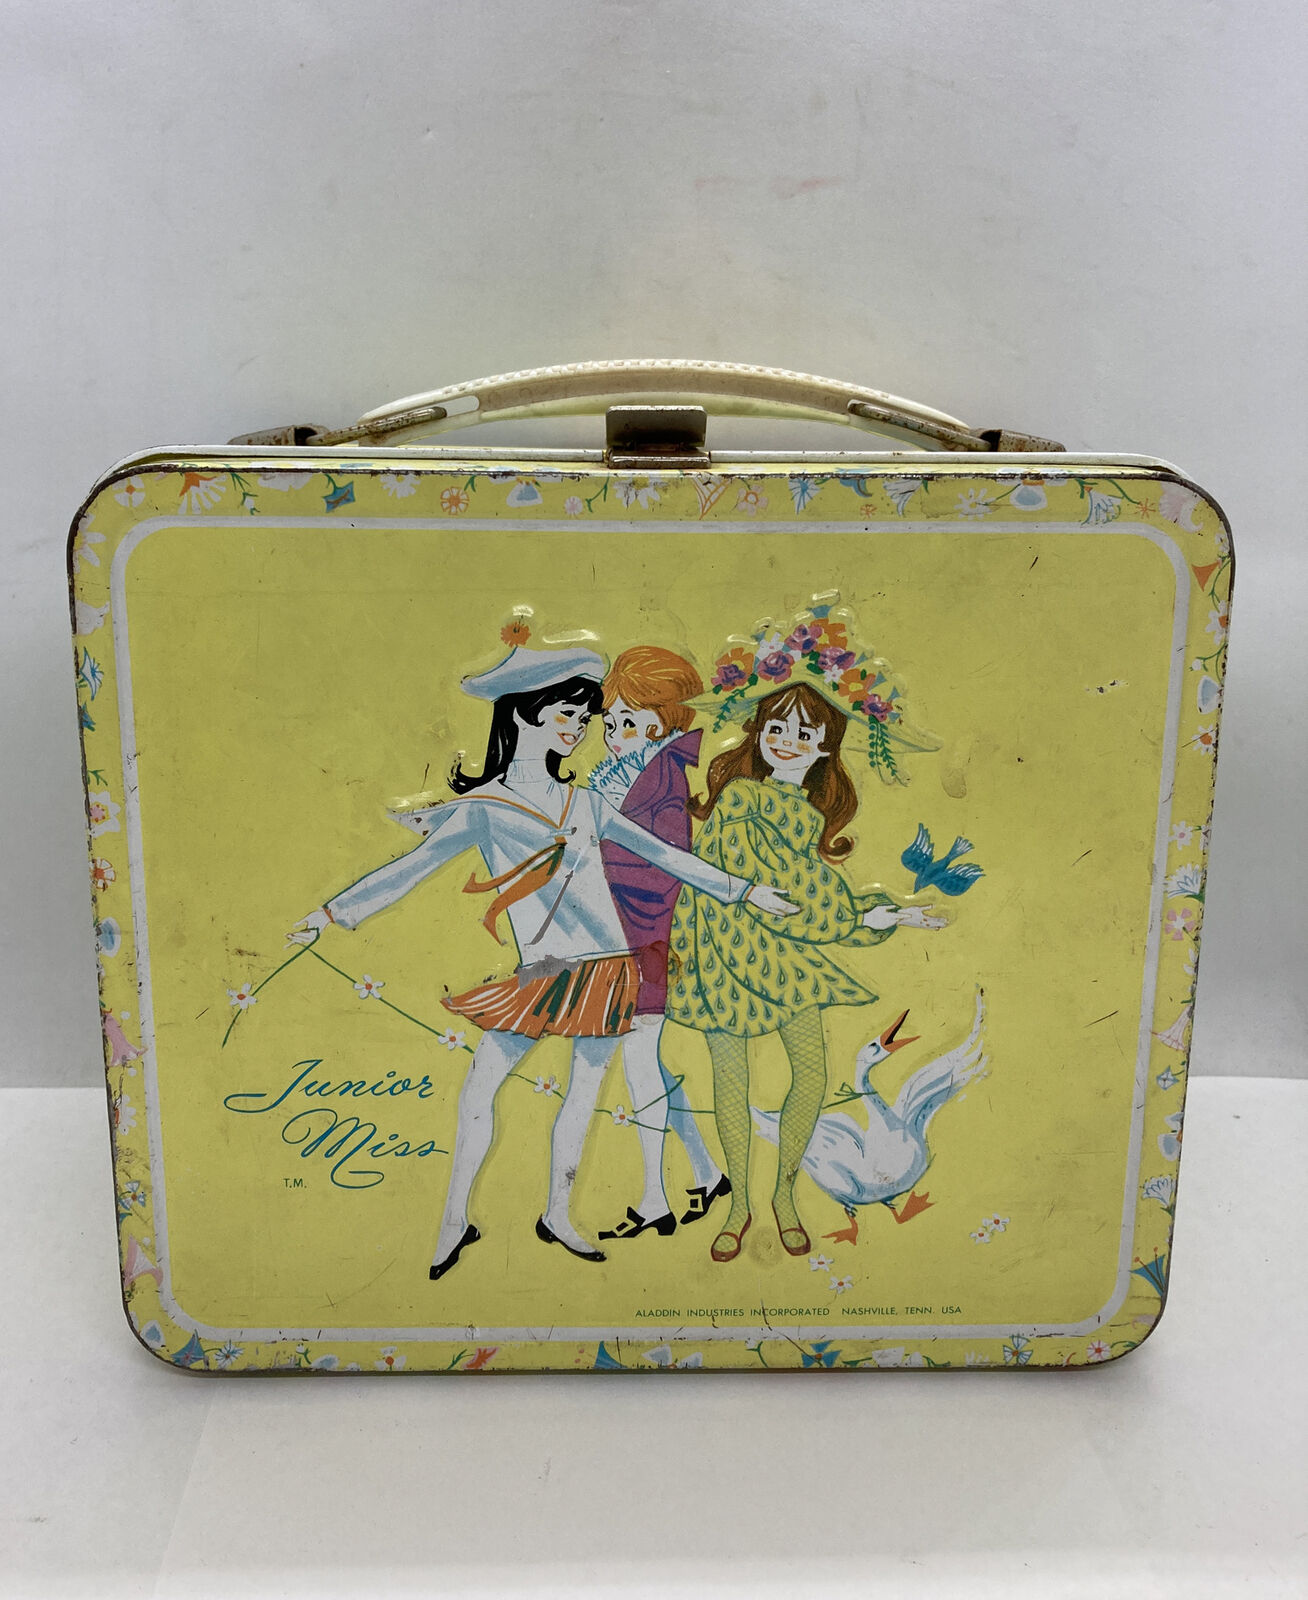 JUNIOR MISS Lunch Box 1971 Aladin Metal Embossed  Yellow No Thermos Empty